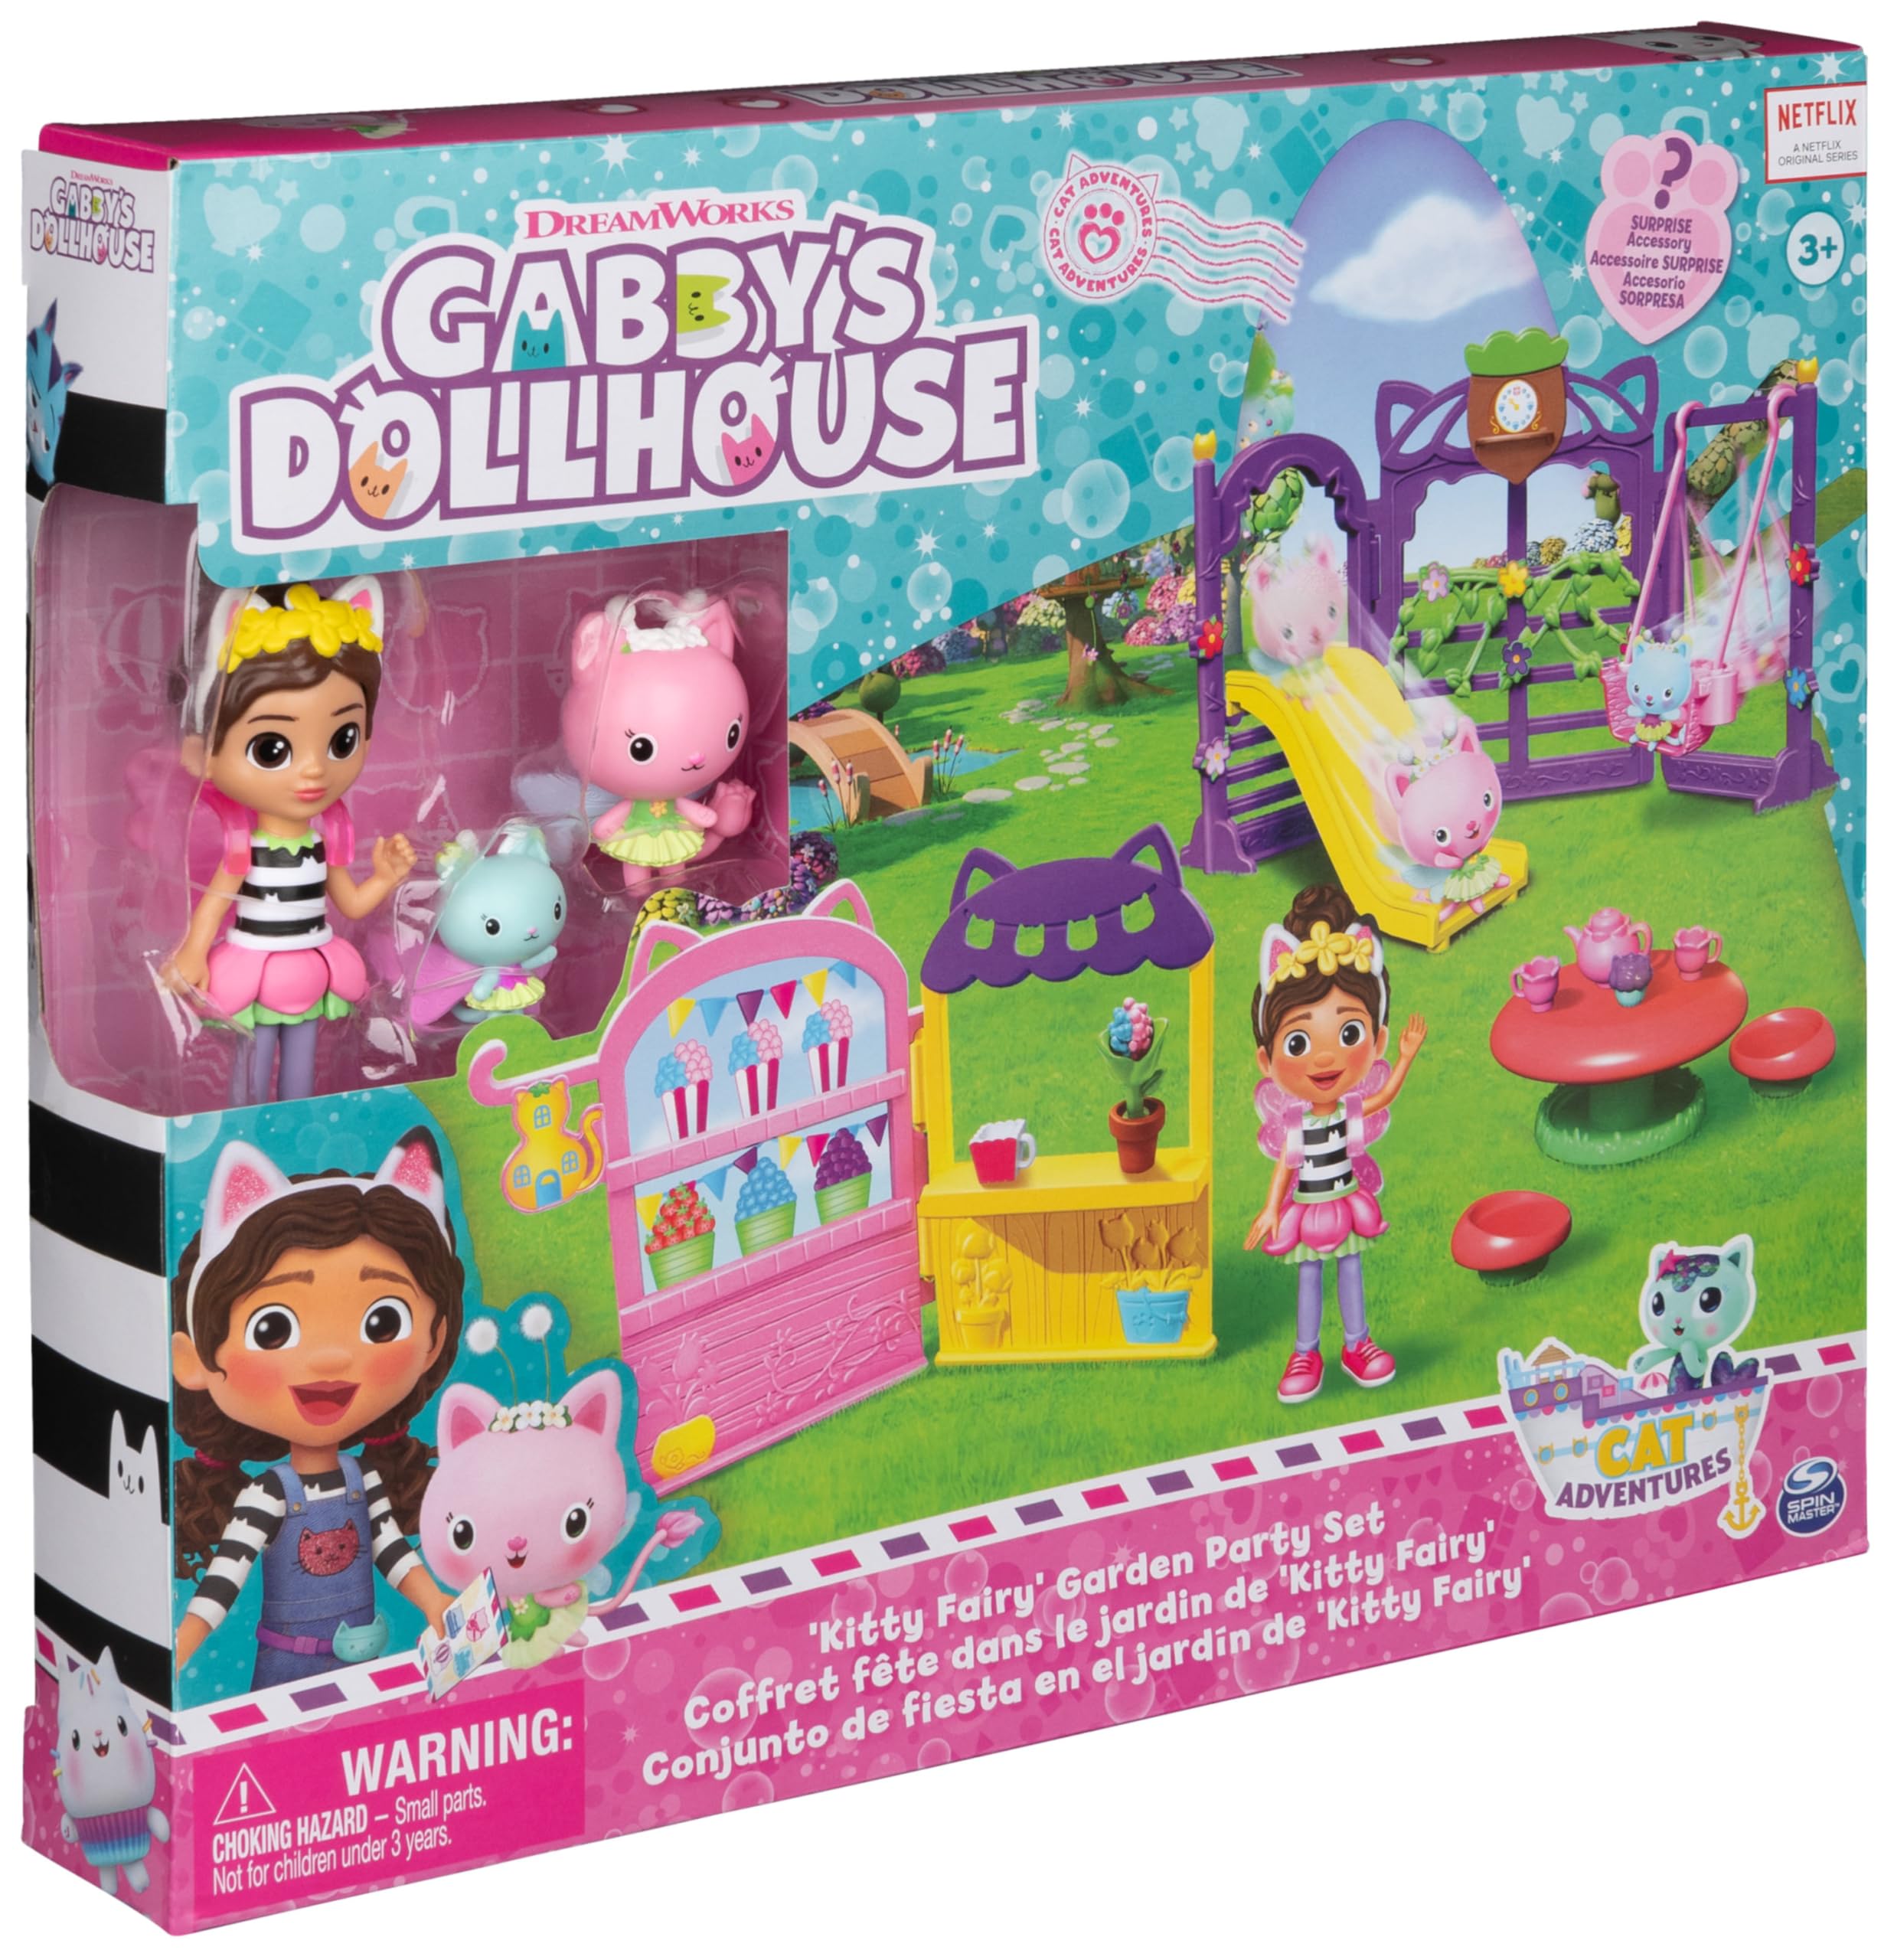 Gabby's Dollhouse, Kitty Fairy Garden Party, 18-Piece Playset with 3 Toy Figures, Surprise Toys & Dollhouse Accessories, Kids Toys for Girls & Boys 3+